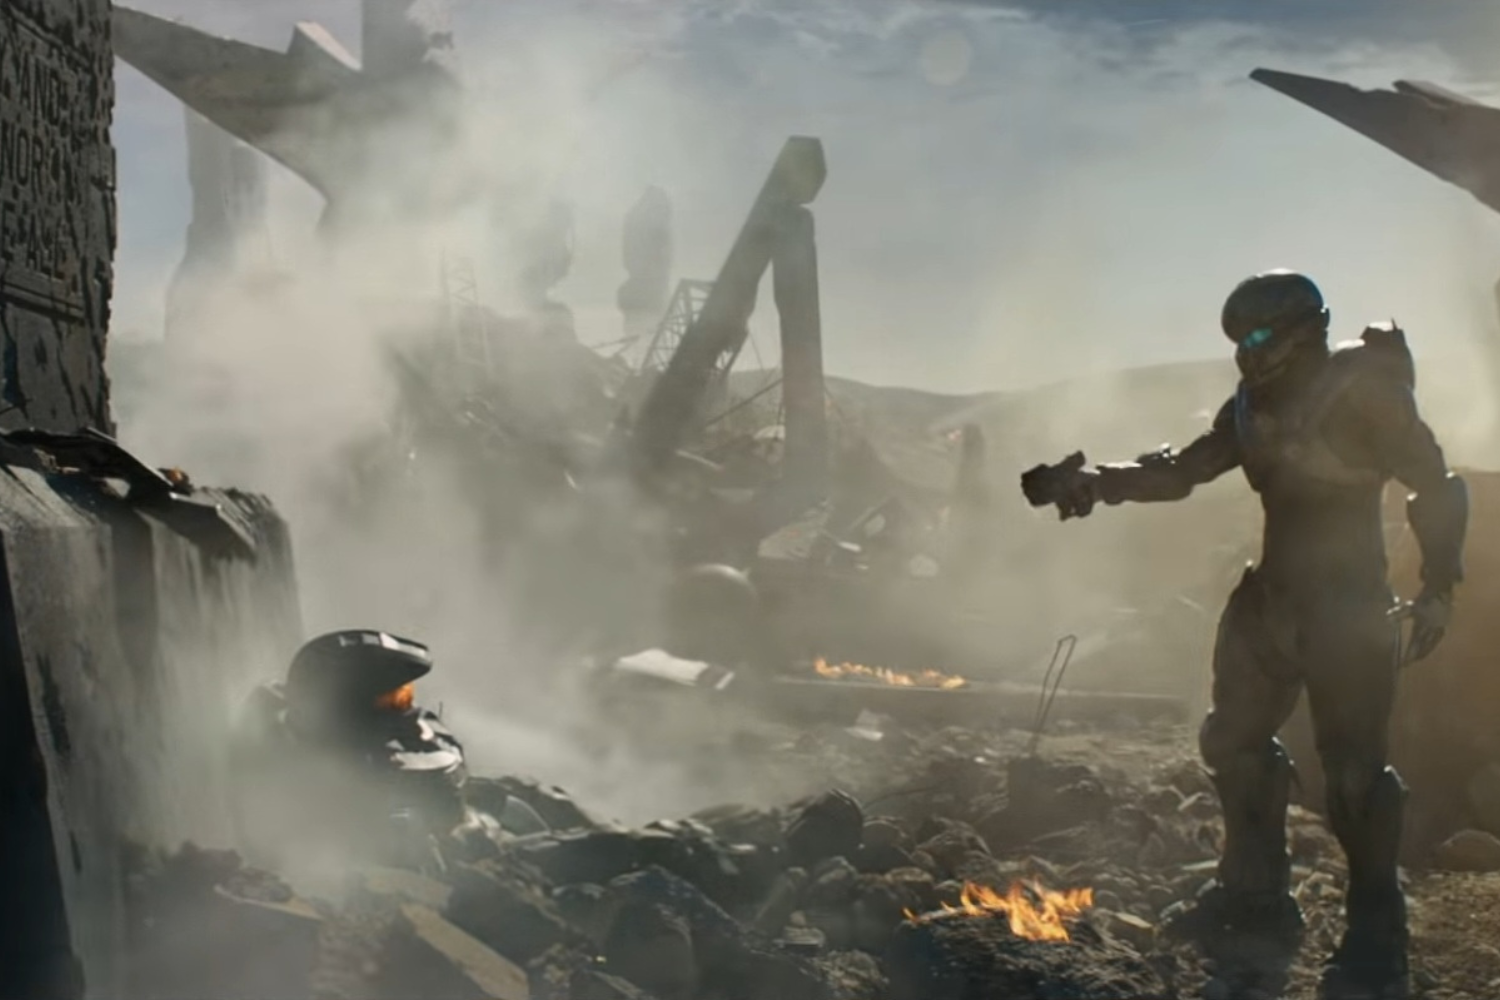 Locke shoots Master Chief in a trailer for Hunt the Truth for Halo 5. When the trailer was released critics said that it marked the end of the popular franchise because of problems with the narrative of the game.